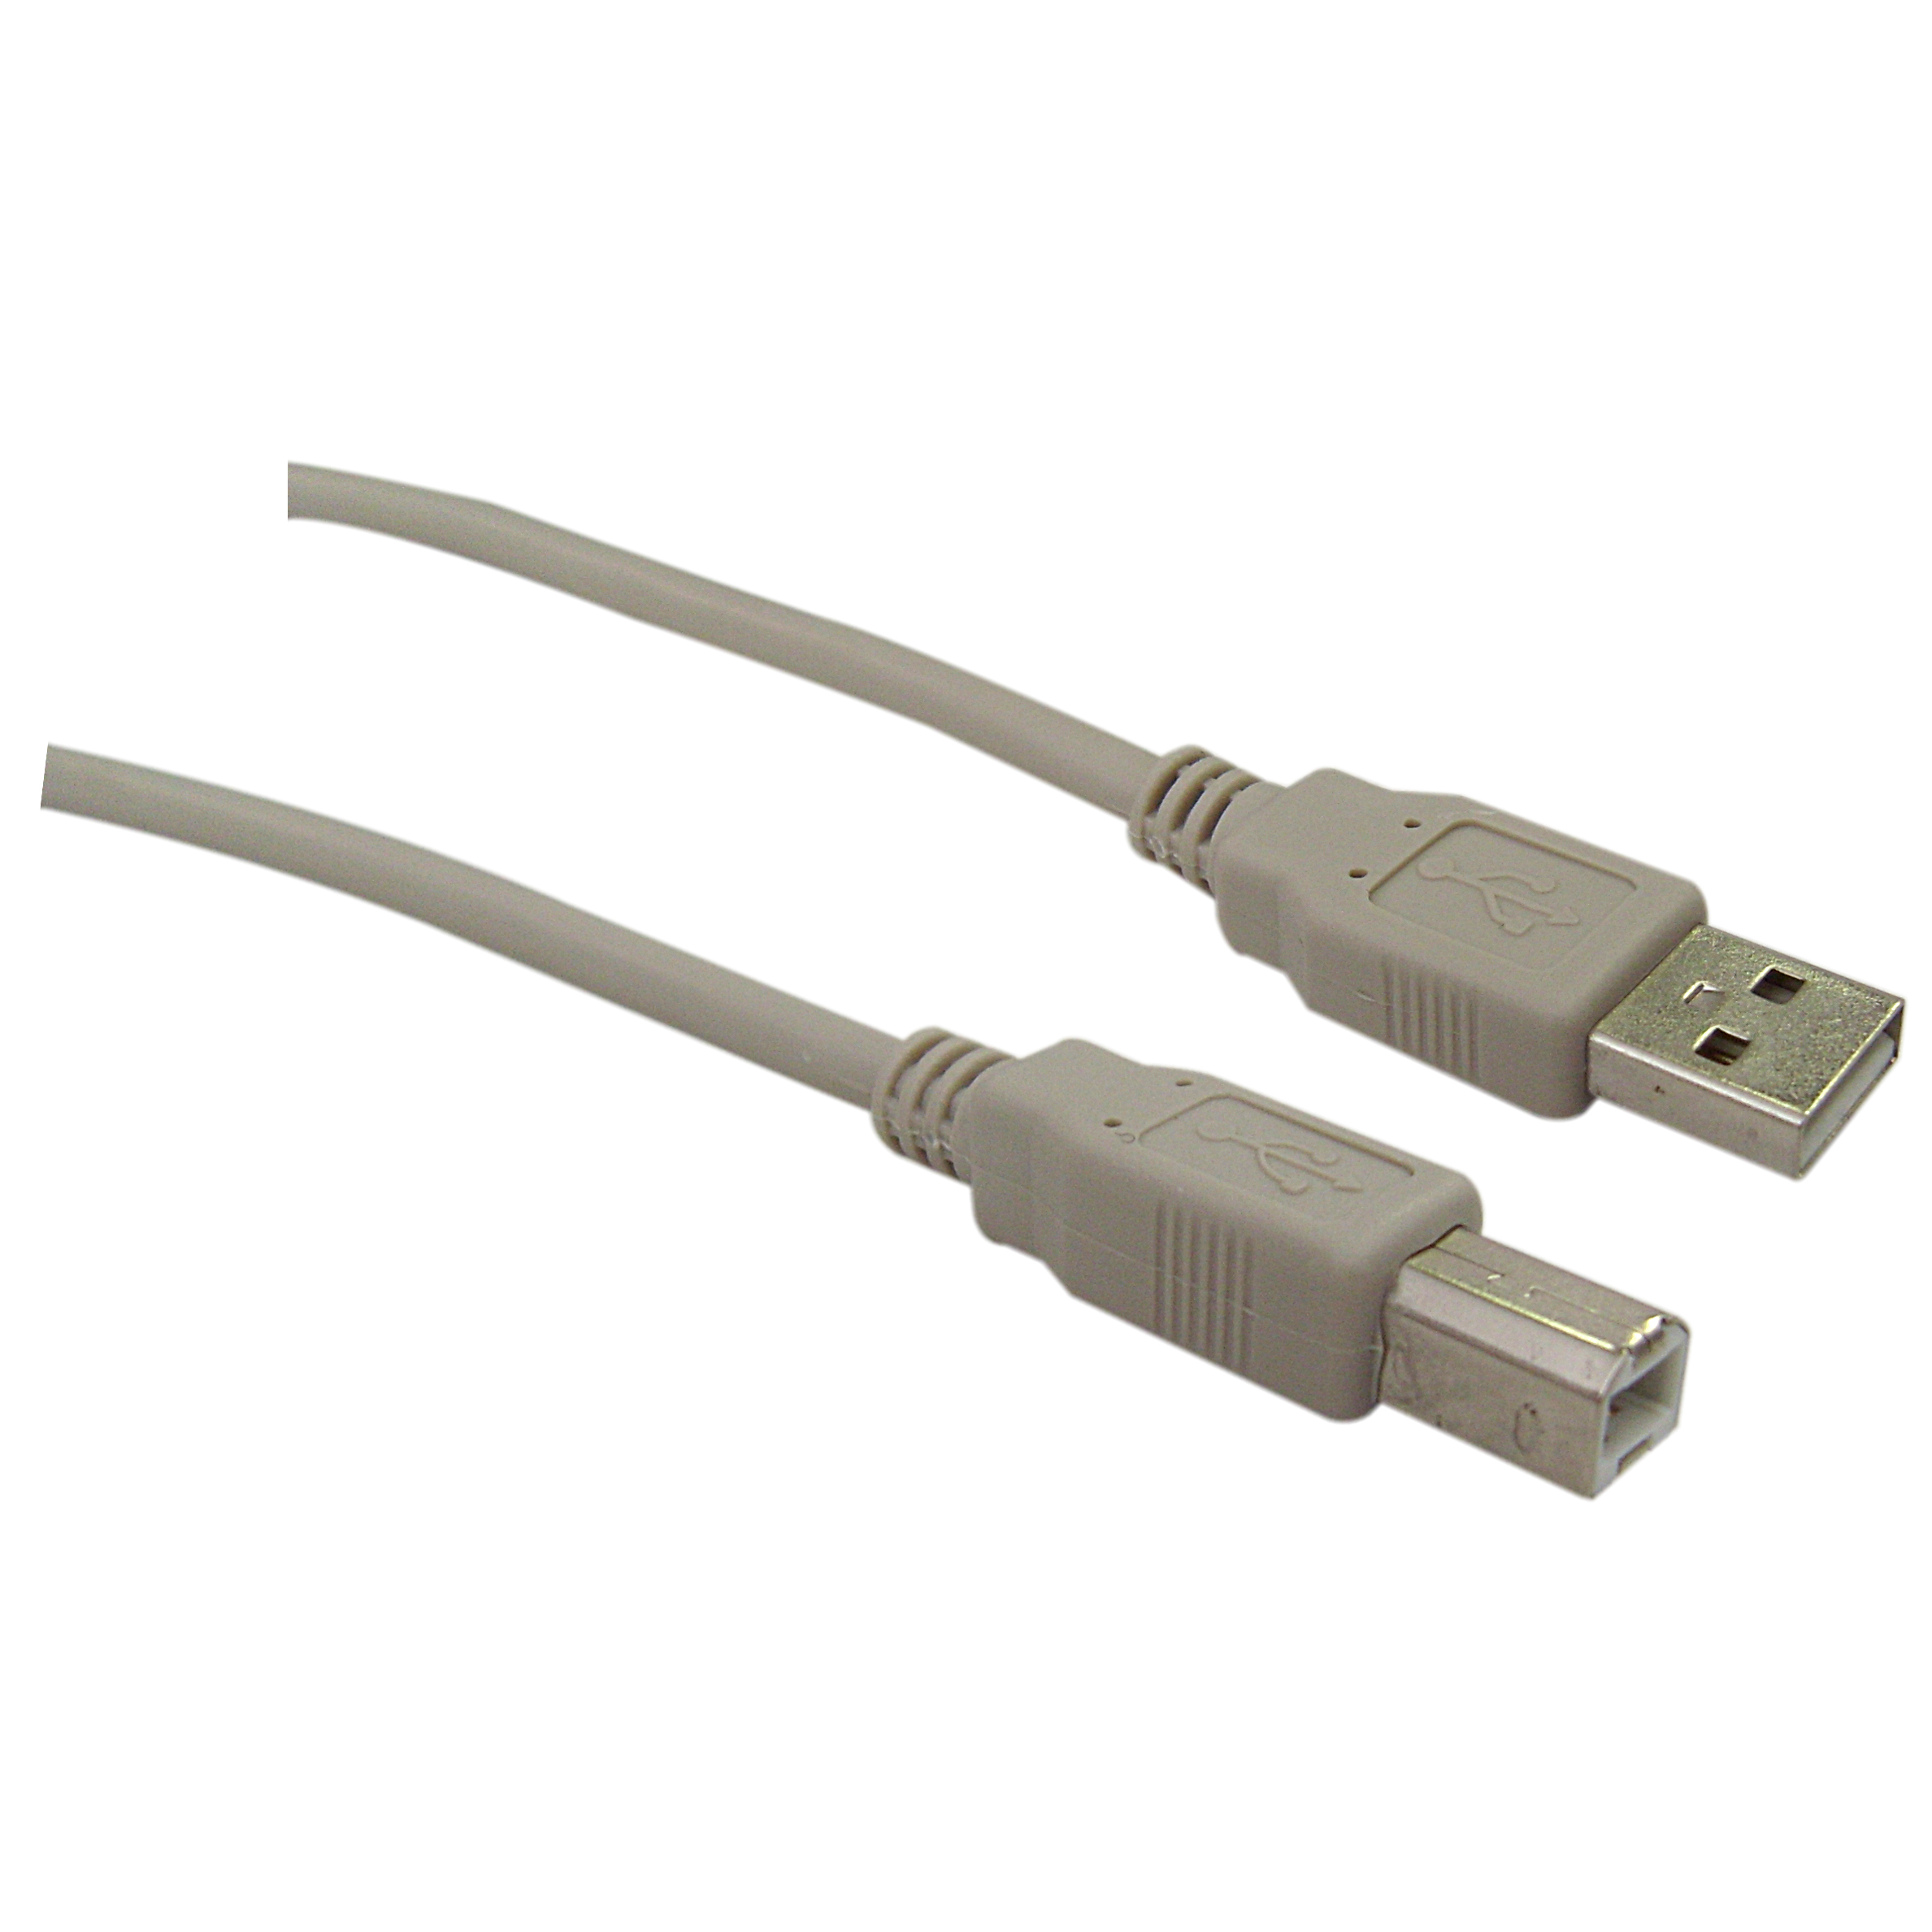 3ft USB 2.0 Printer/Device Cable | Type A Male to Type B Male